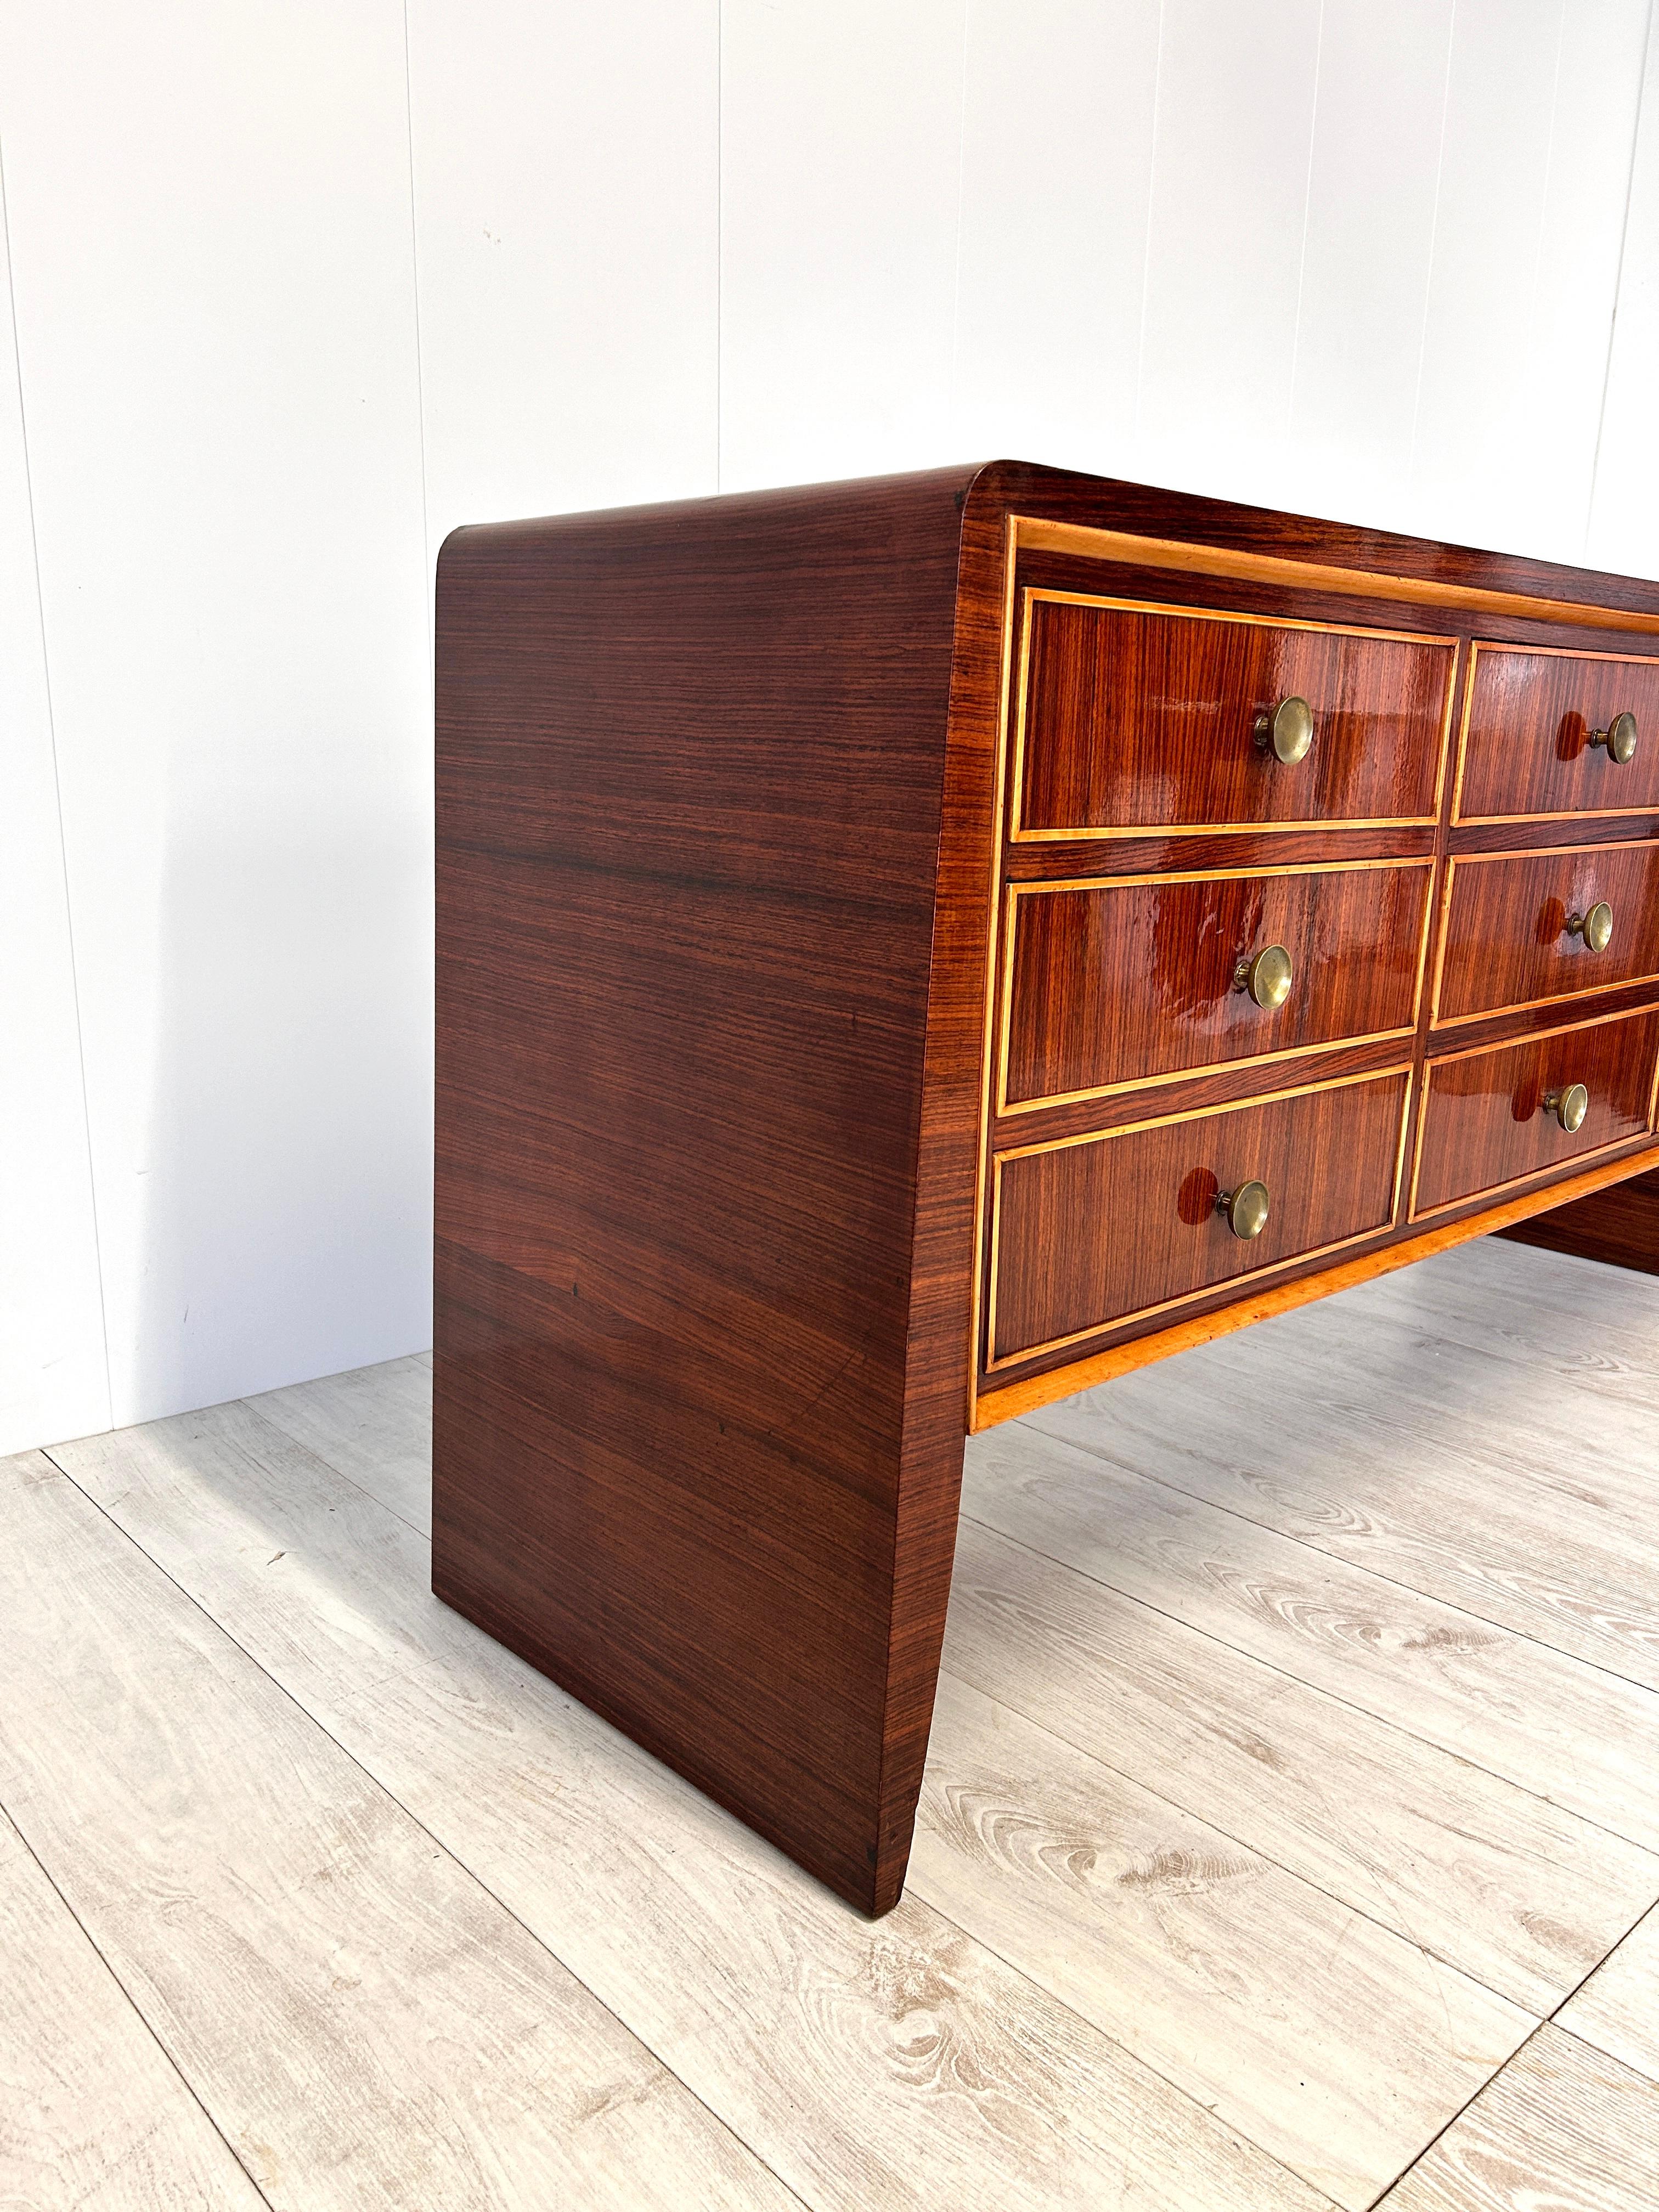 Brass Paolo Buffa storage cabinet, Italy, 1950s For Sale